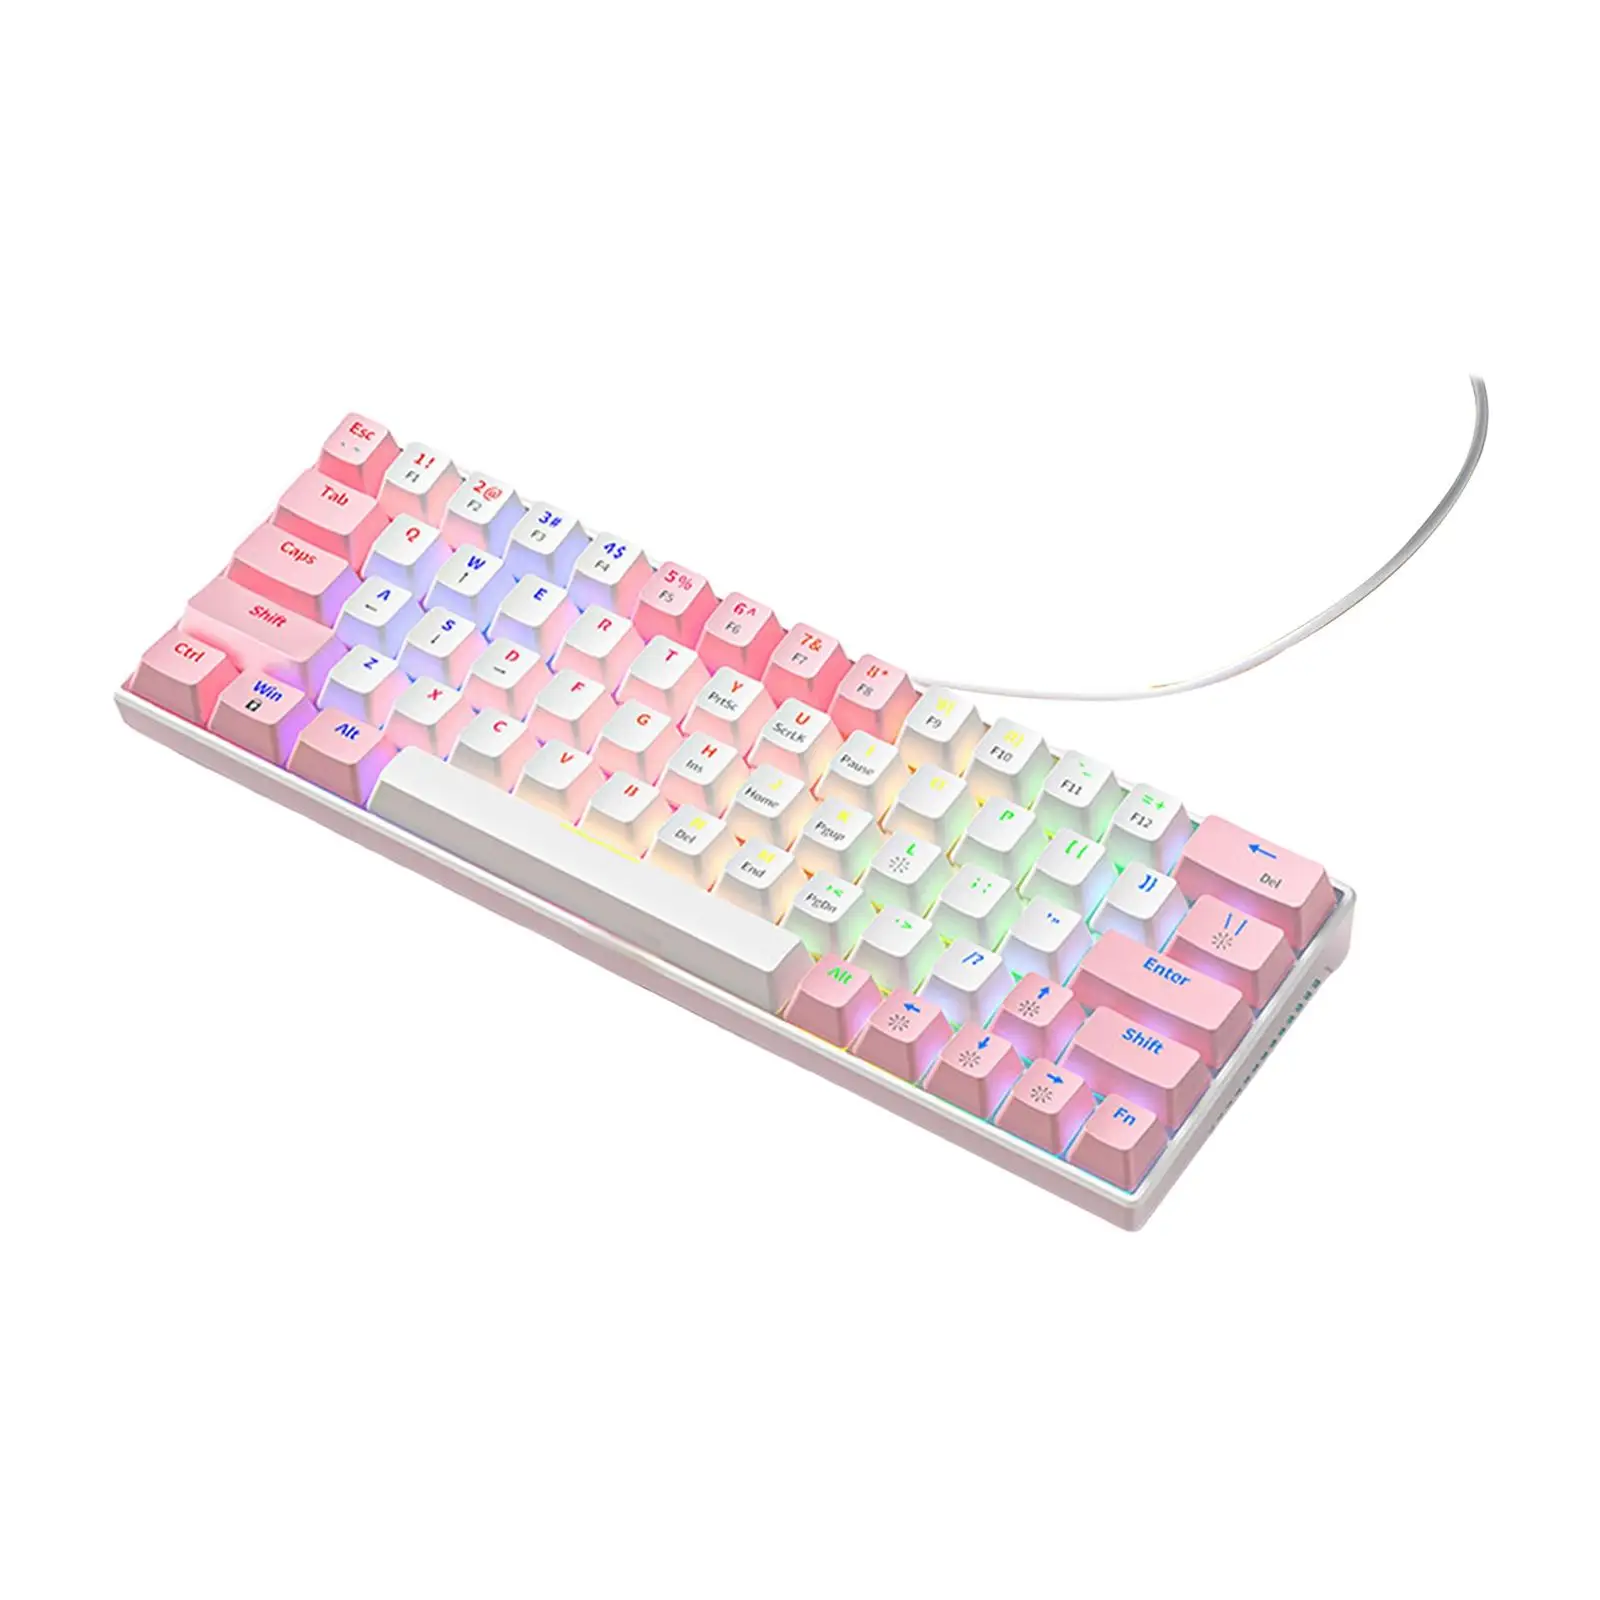 Wired Mechanical Keyboard Free Drive High and Low Support Legs Hot Swap Keyboard RGB Backlit USB Gaming Keyboard Laptop Keyboard